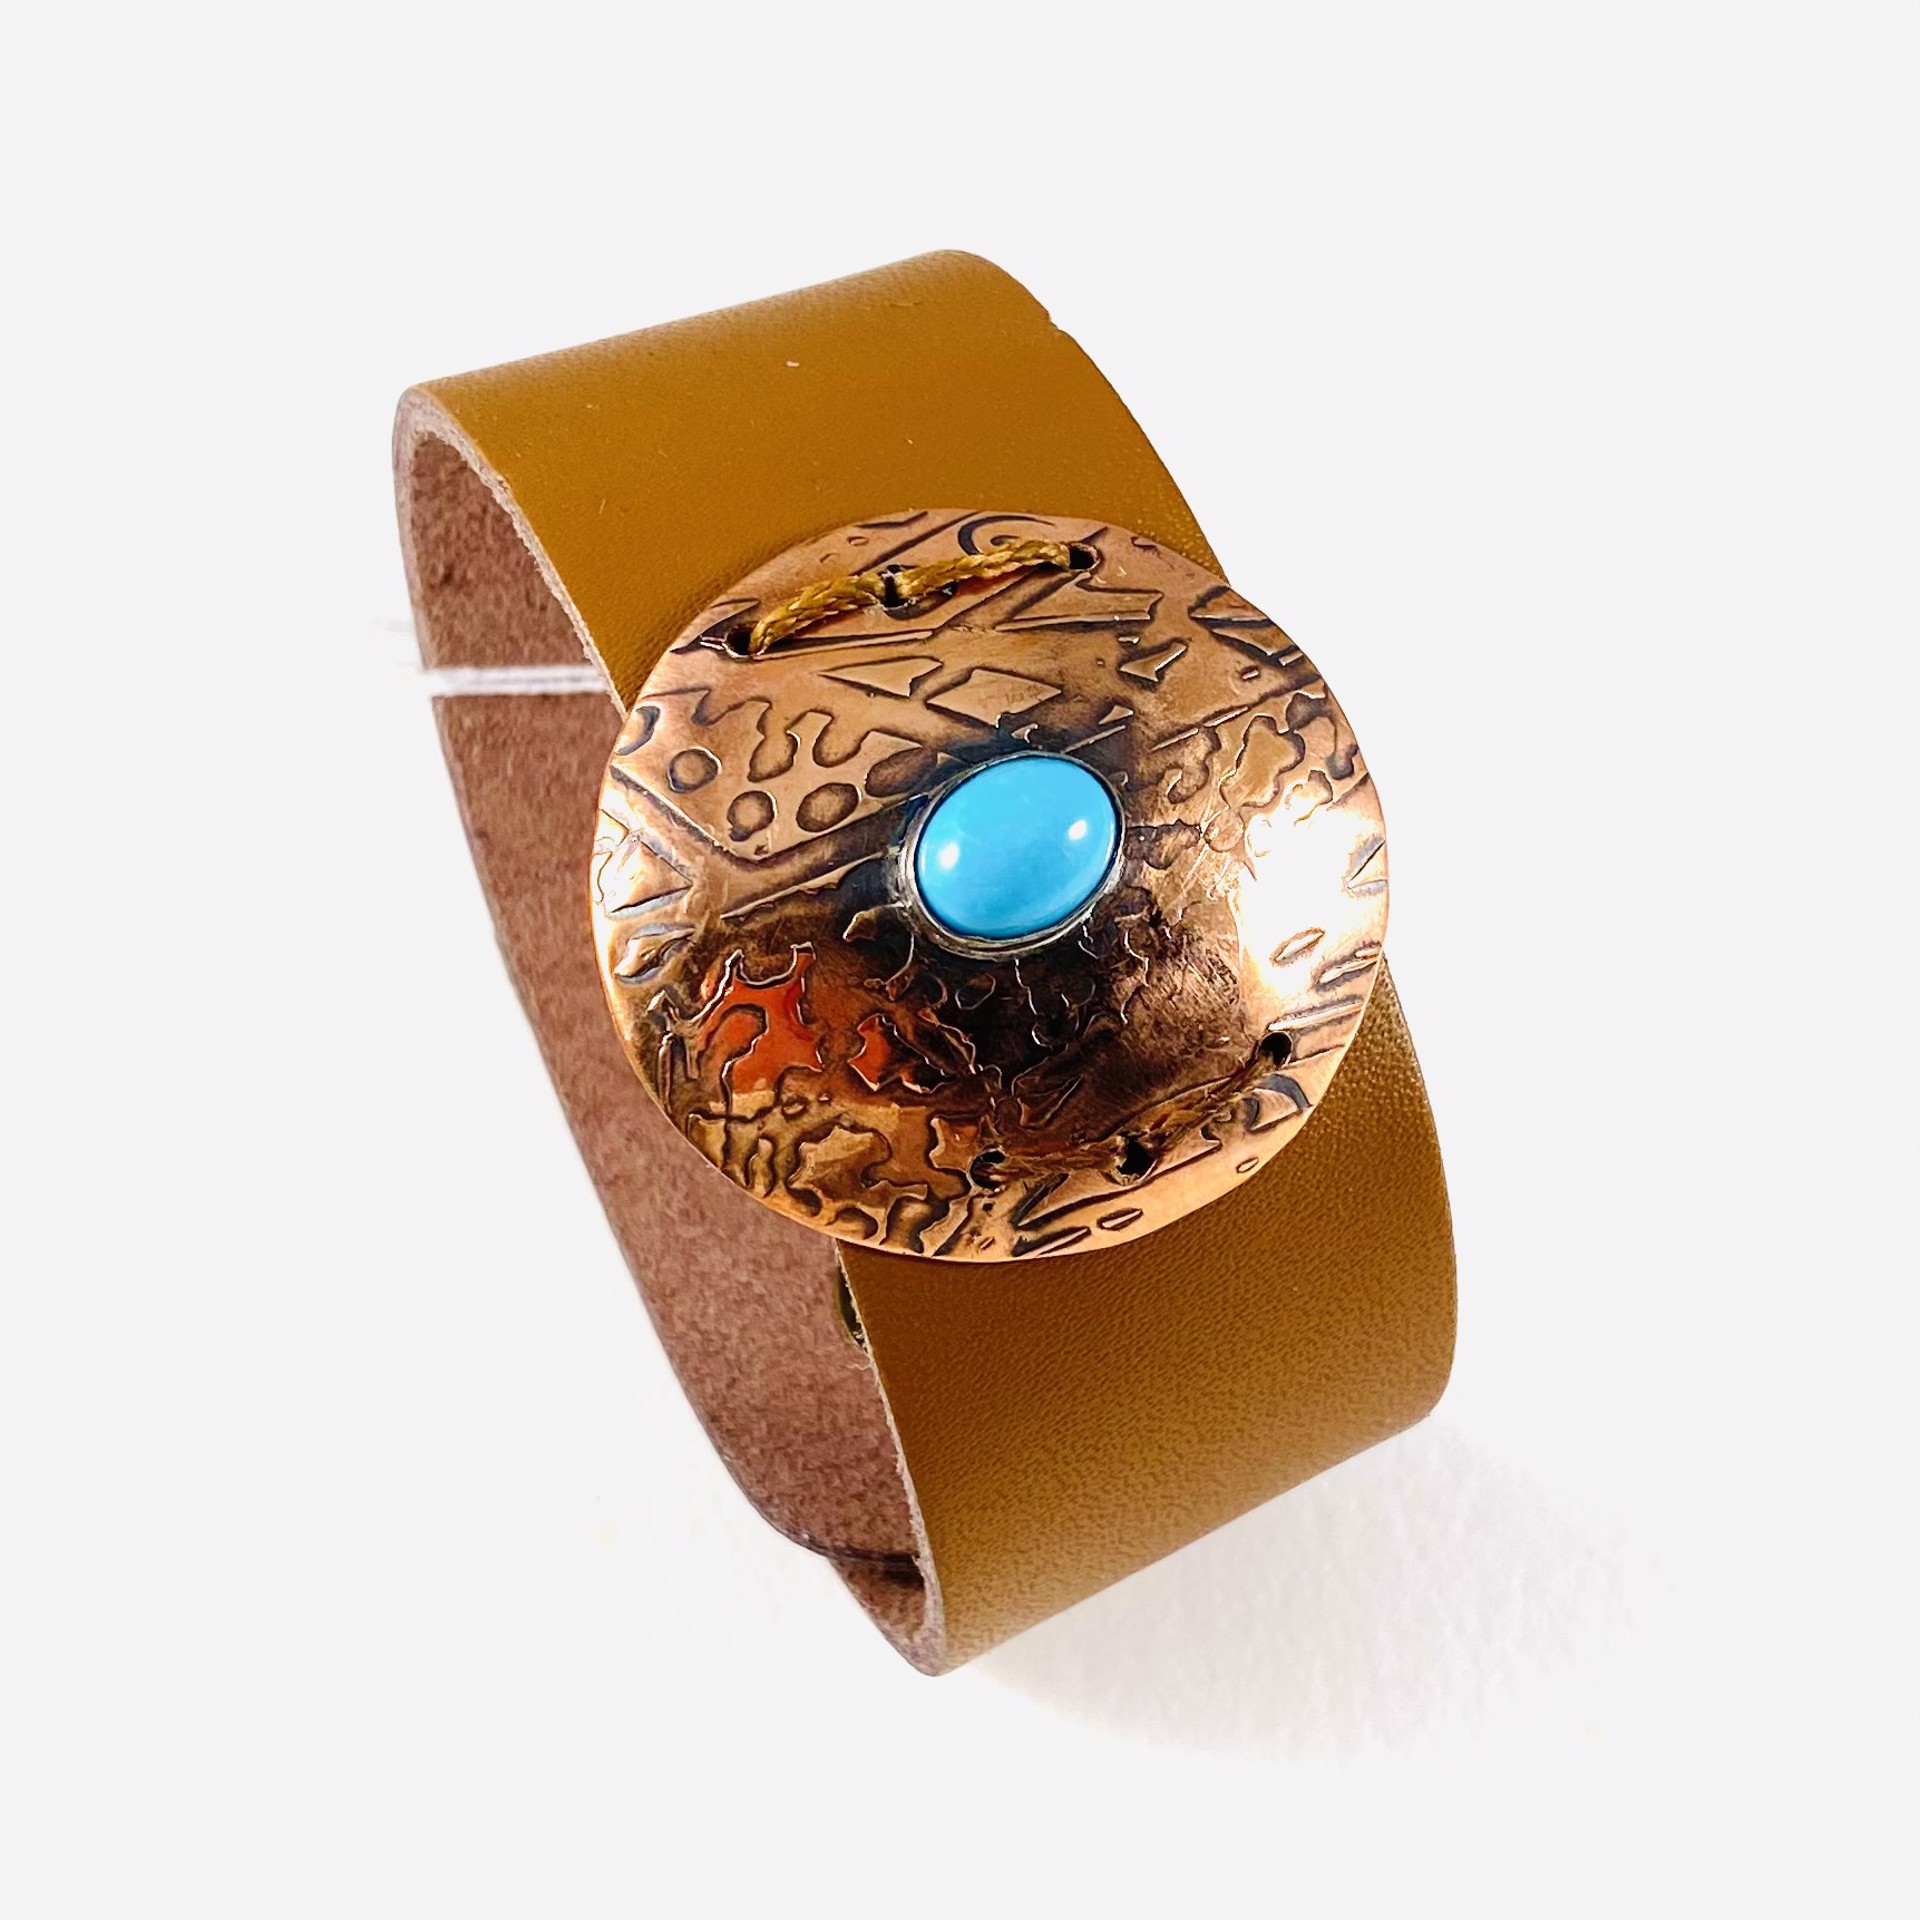 Turquoise and Copper on Leather Cuff Bracelet AB21-56 by Anne Bivens